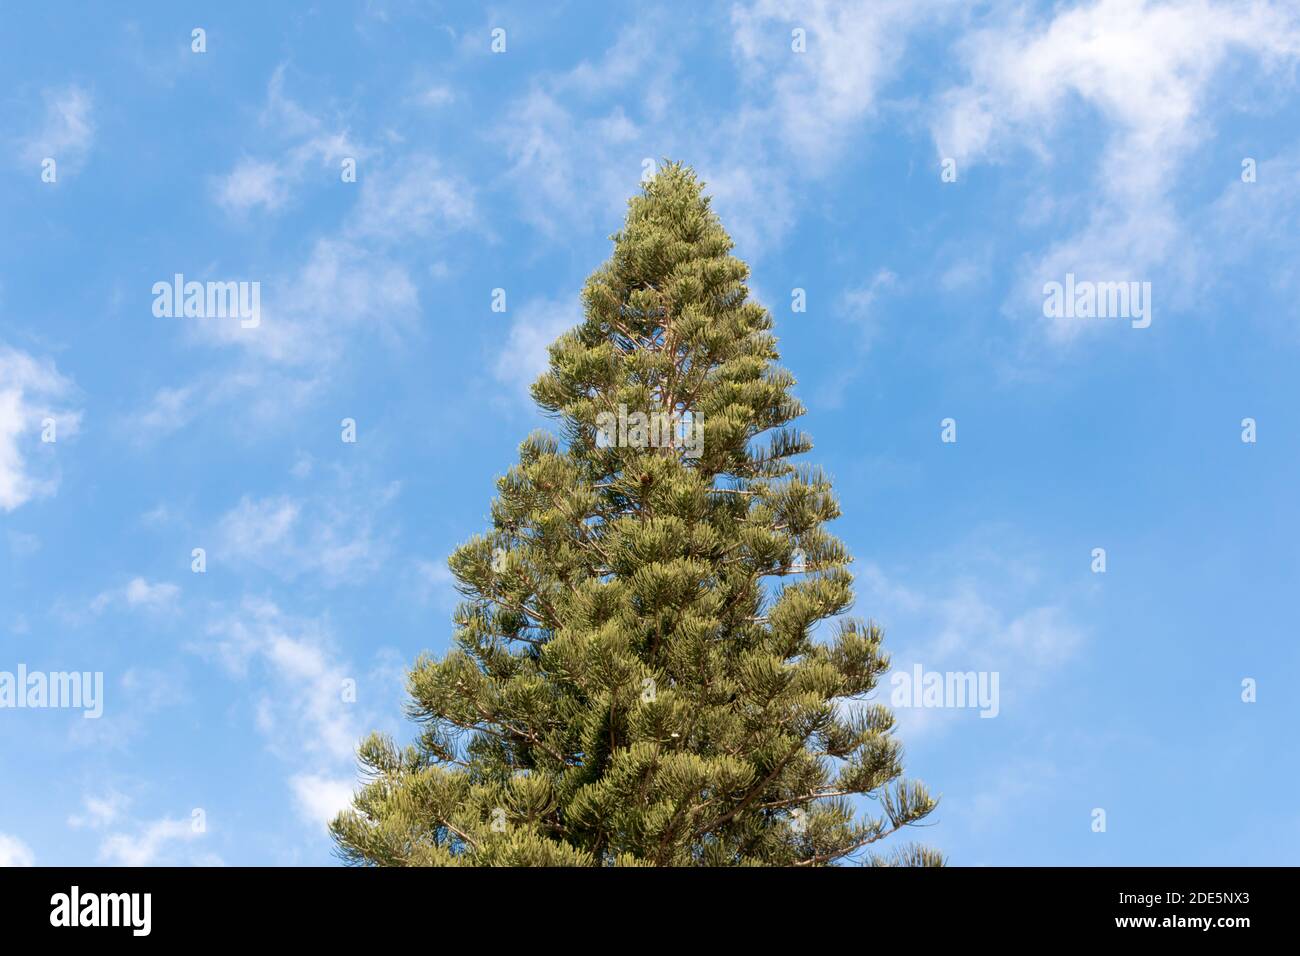 A pine tree in Playa del Ingles, Canary Islands, Spain. Stock Photo